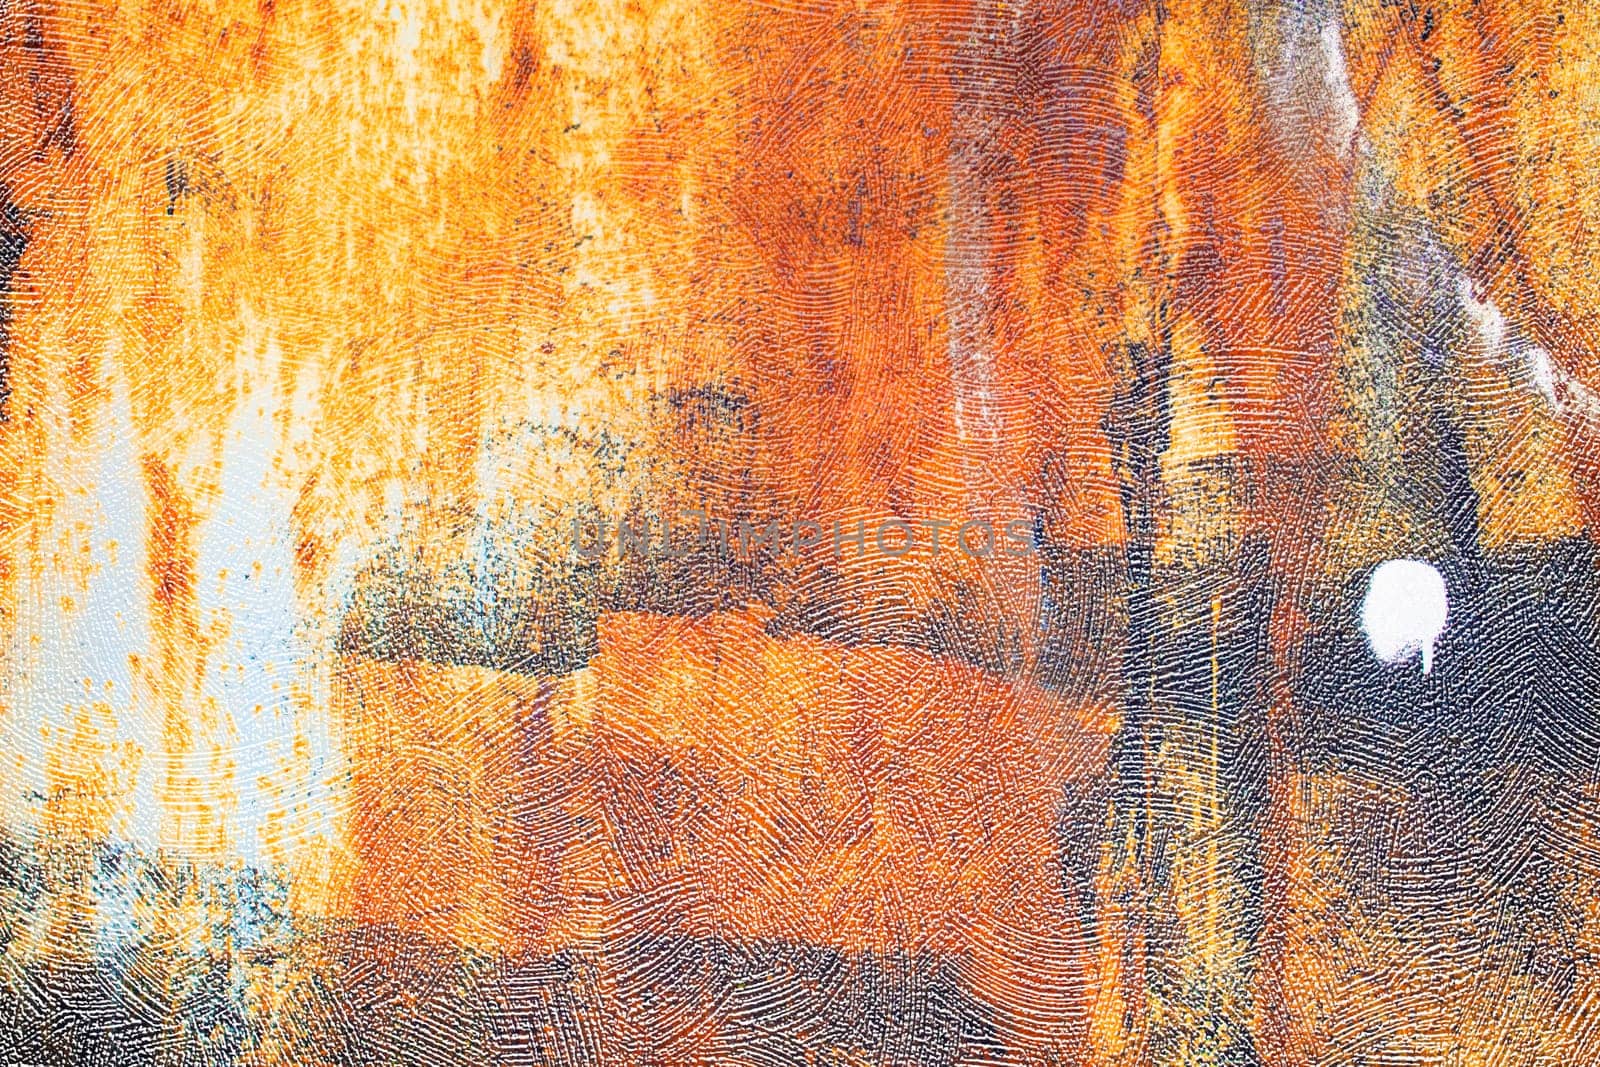 Grunge texture pattern of a rusty wall on paper wallpaper. by Sviatlana